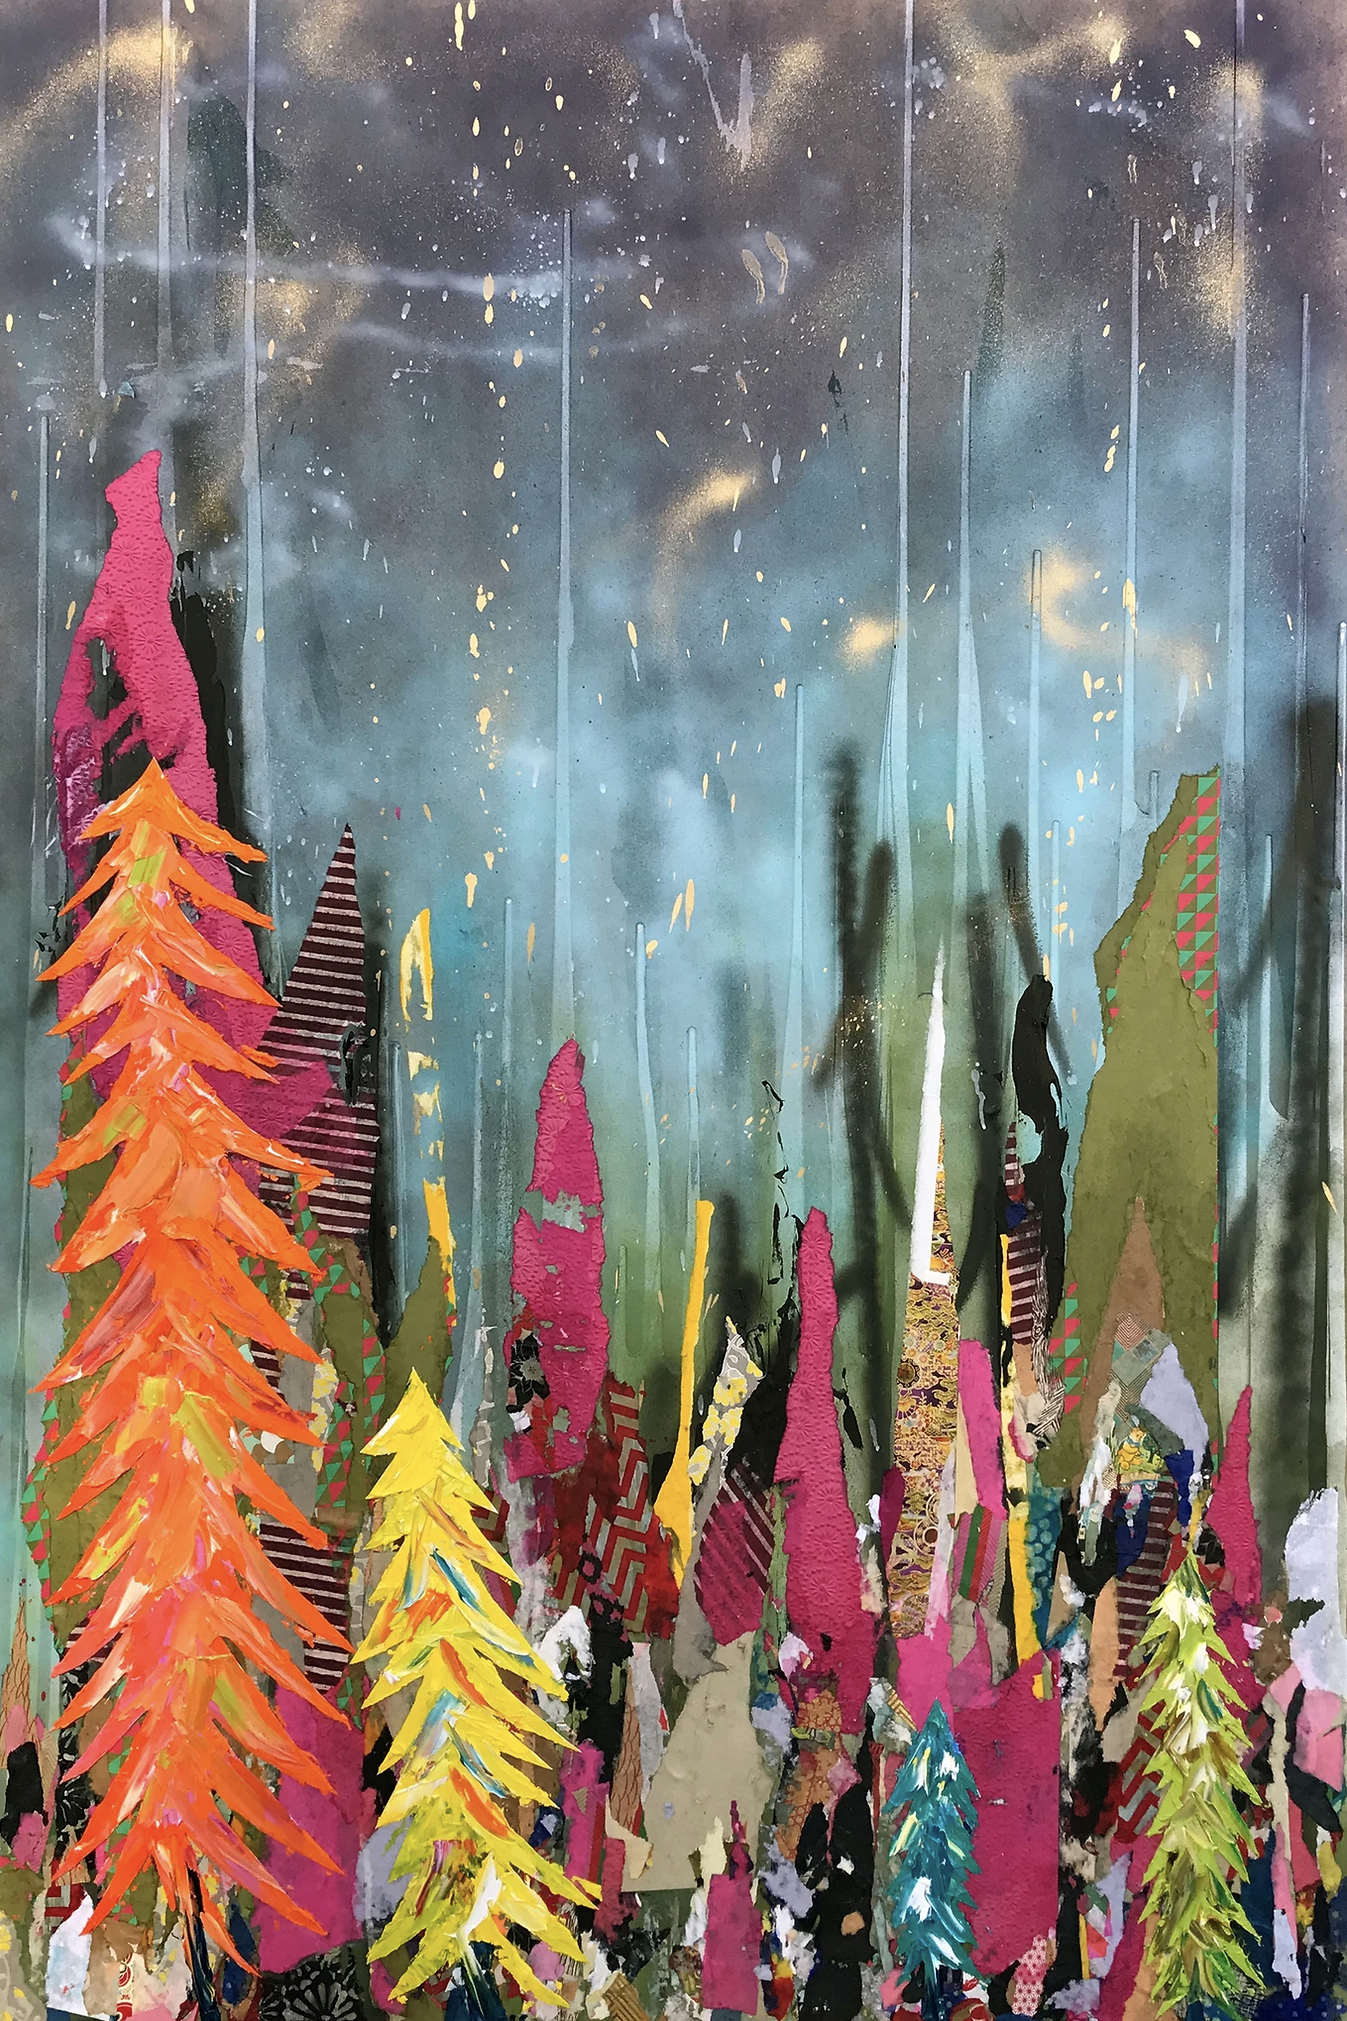 Aurora Borealis amongst the Candy Trees - Part 2 2017 (44"x66") Mixed media collage and oil on panel board.